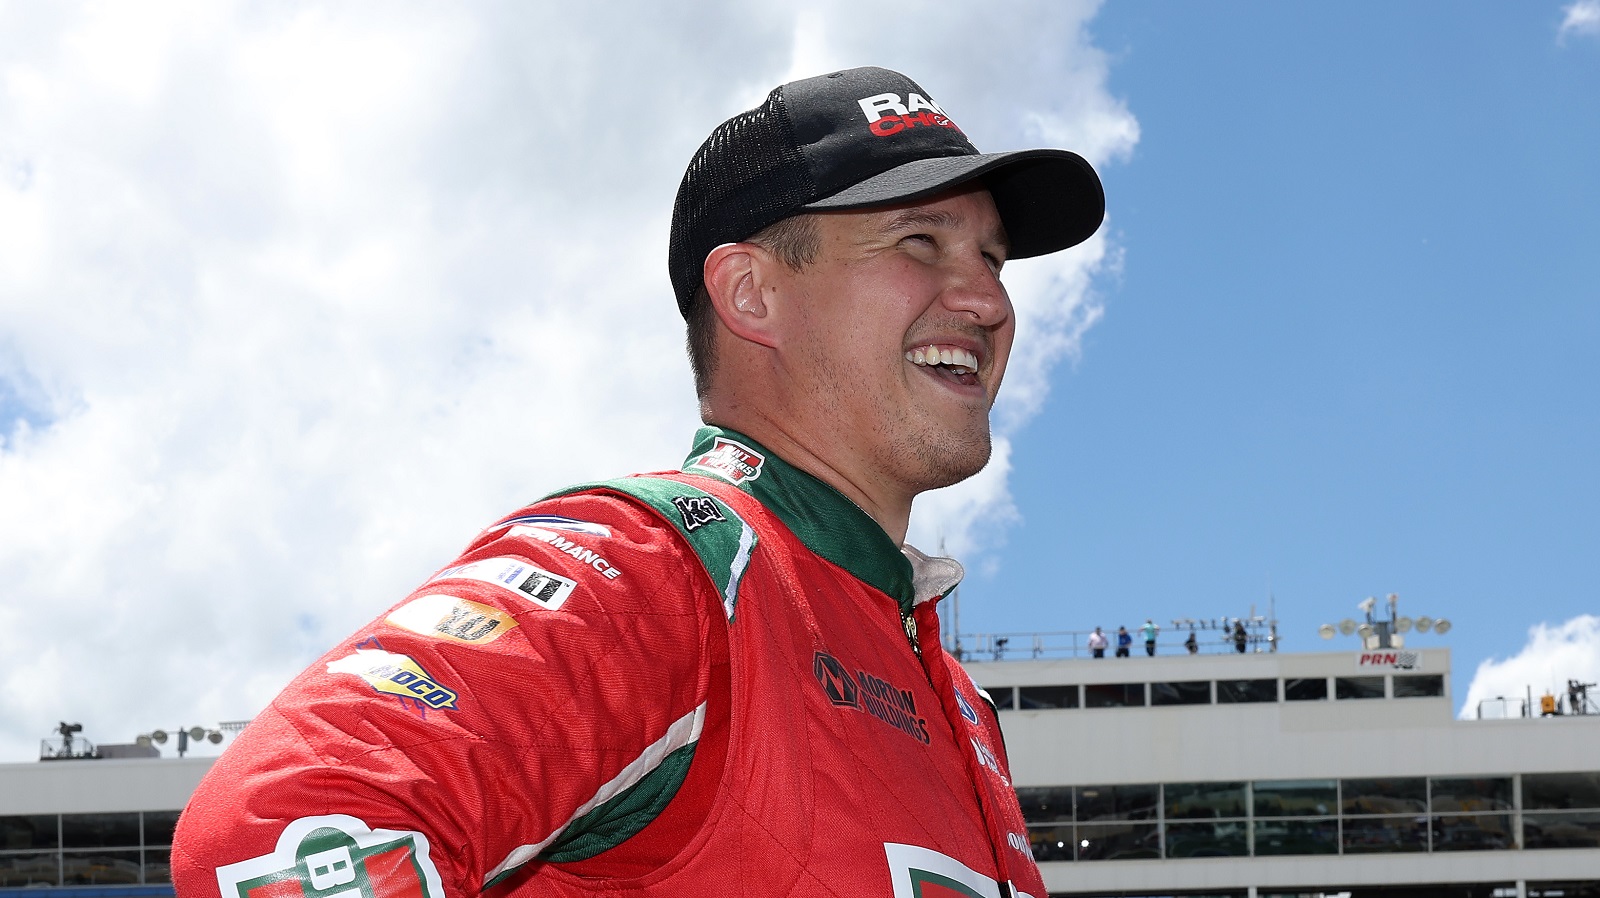 Ryan Preece looks on during qualifying for the NASCAR Xfinity Series Alsco Uniforms 300 at Charlotte Motor Speedway on May 27, 2022. | James Gilbert/Getty Images